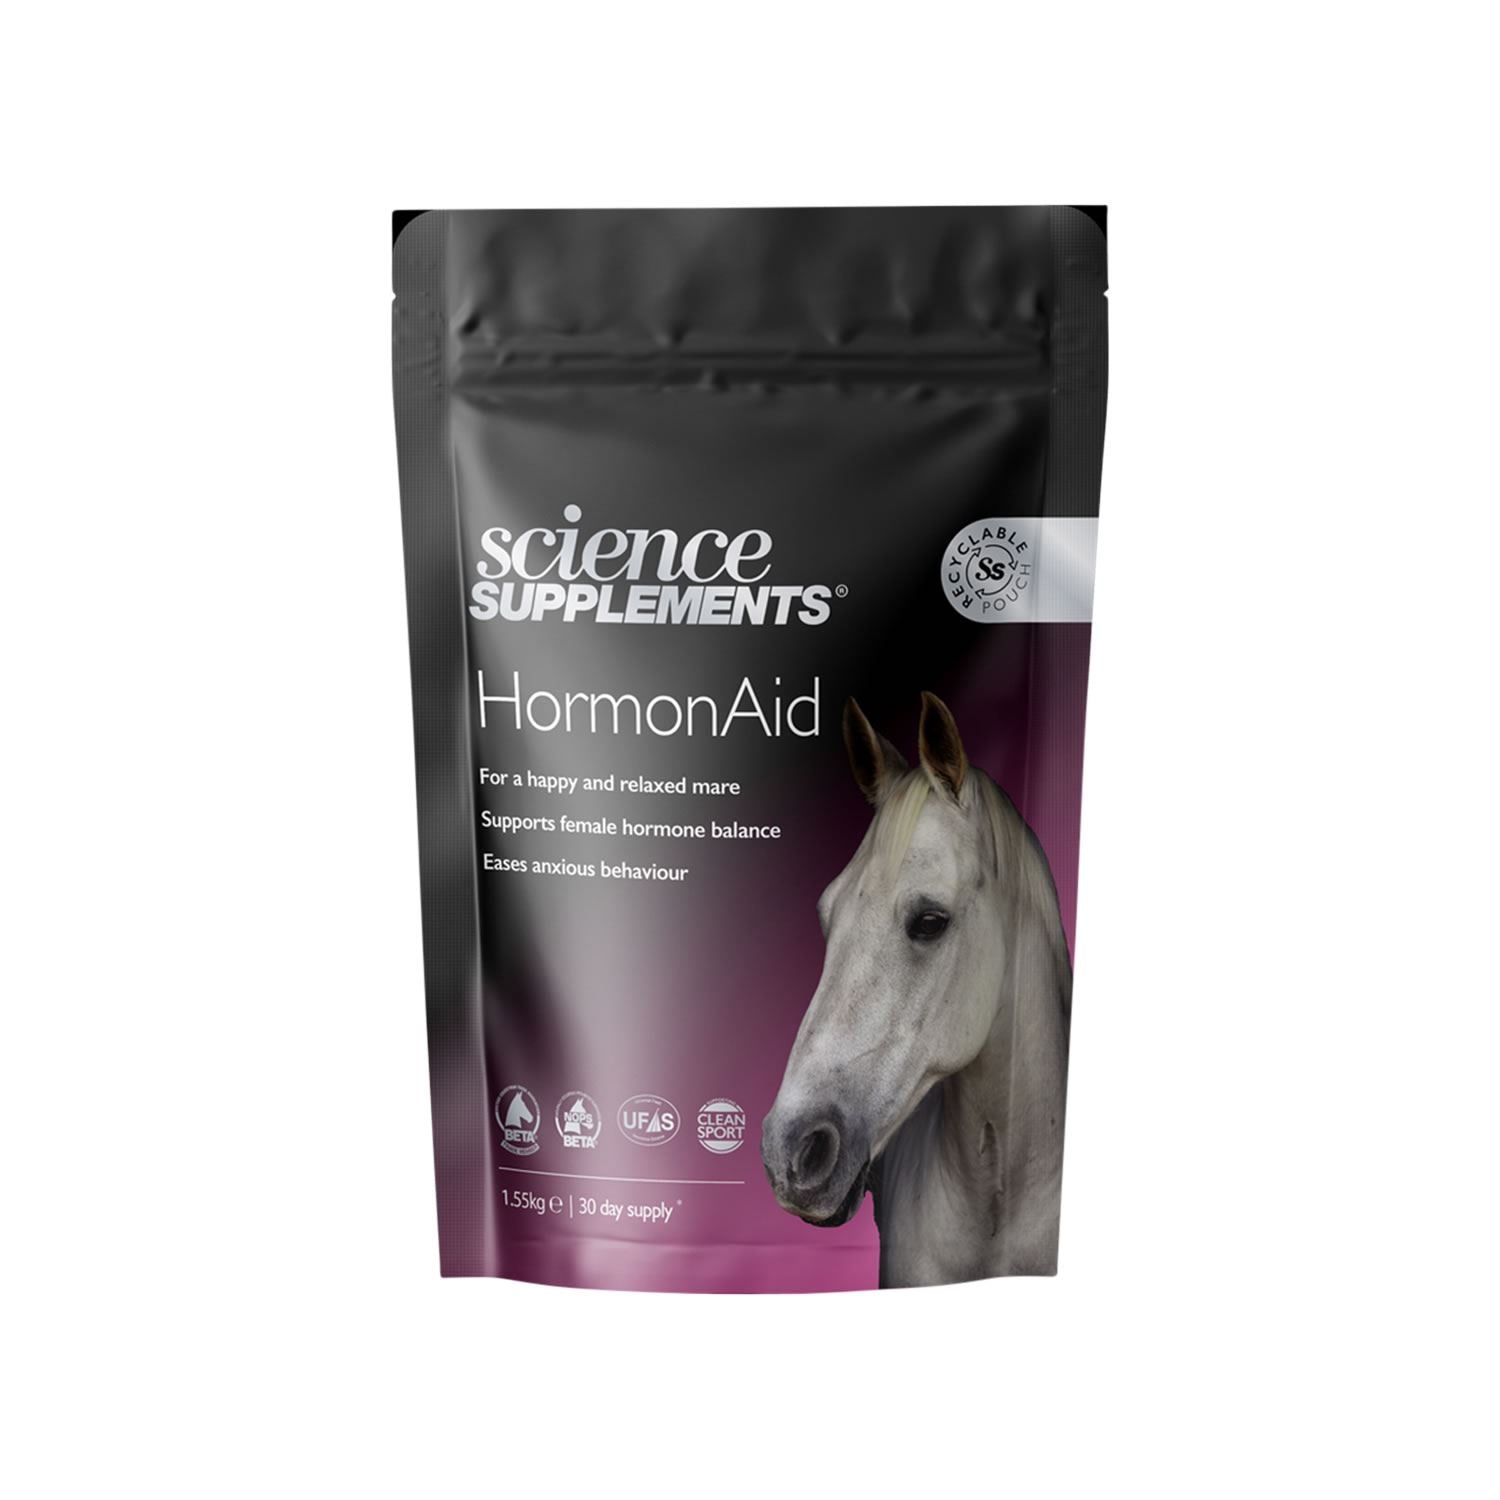 Science Supplements Hormonaid - Just Horse Riders